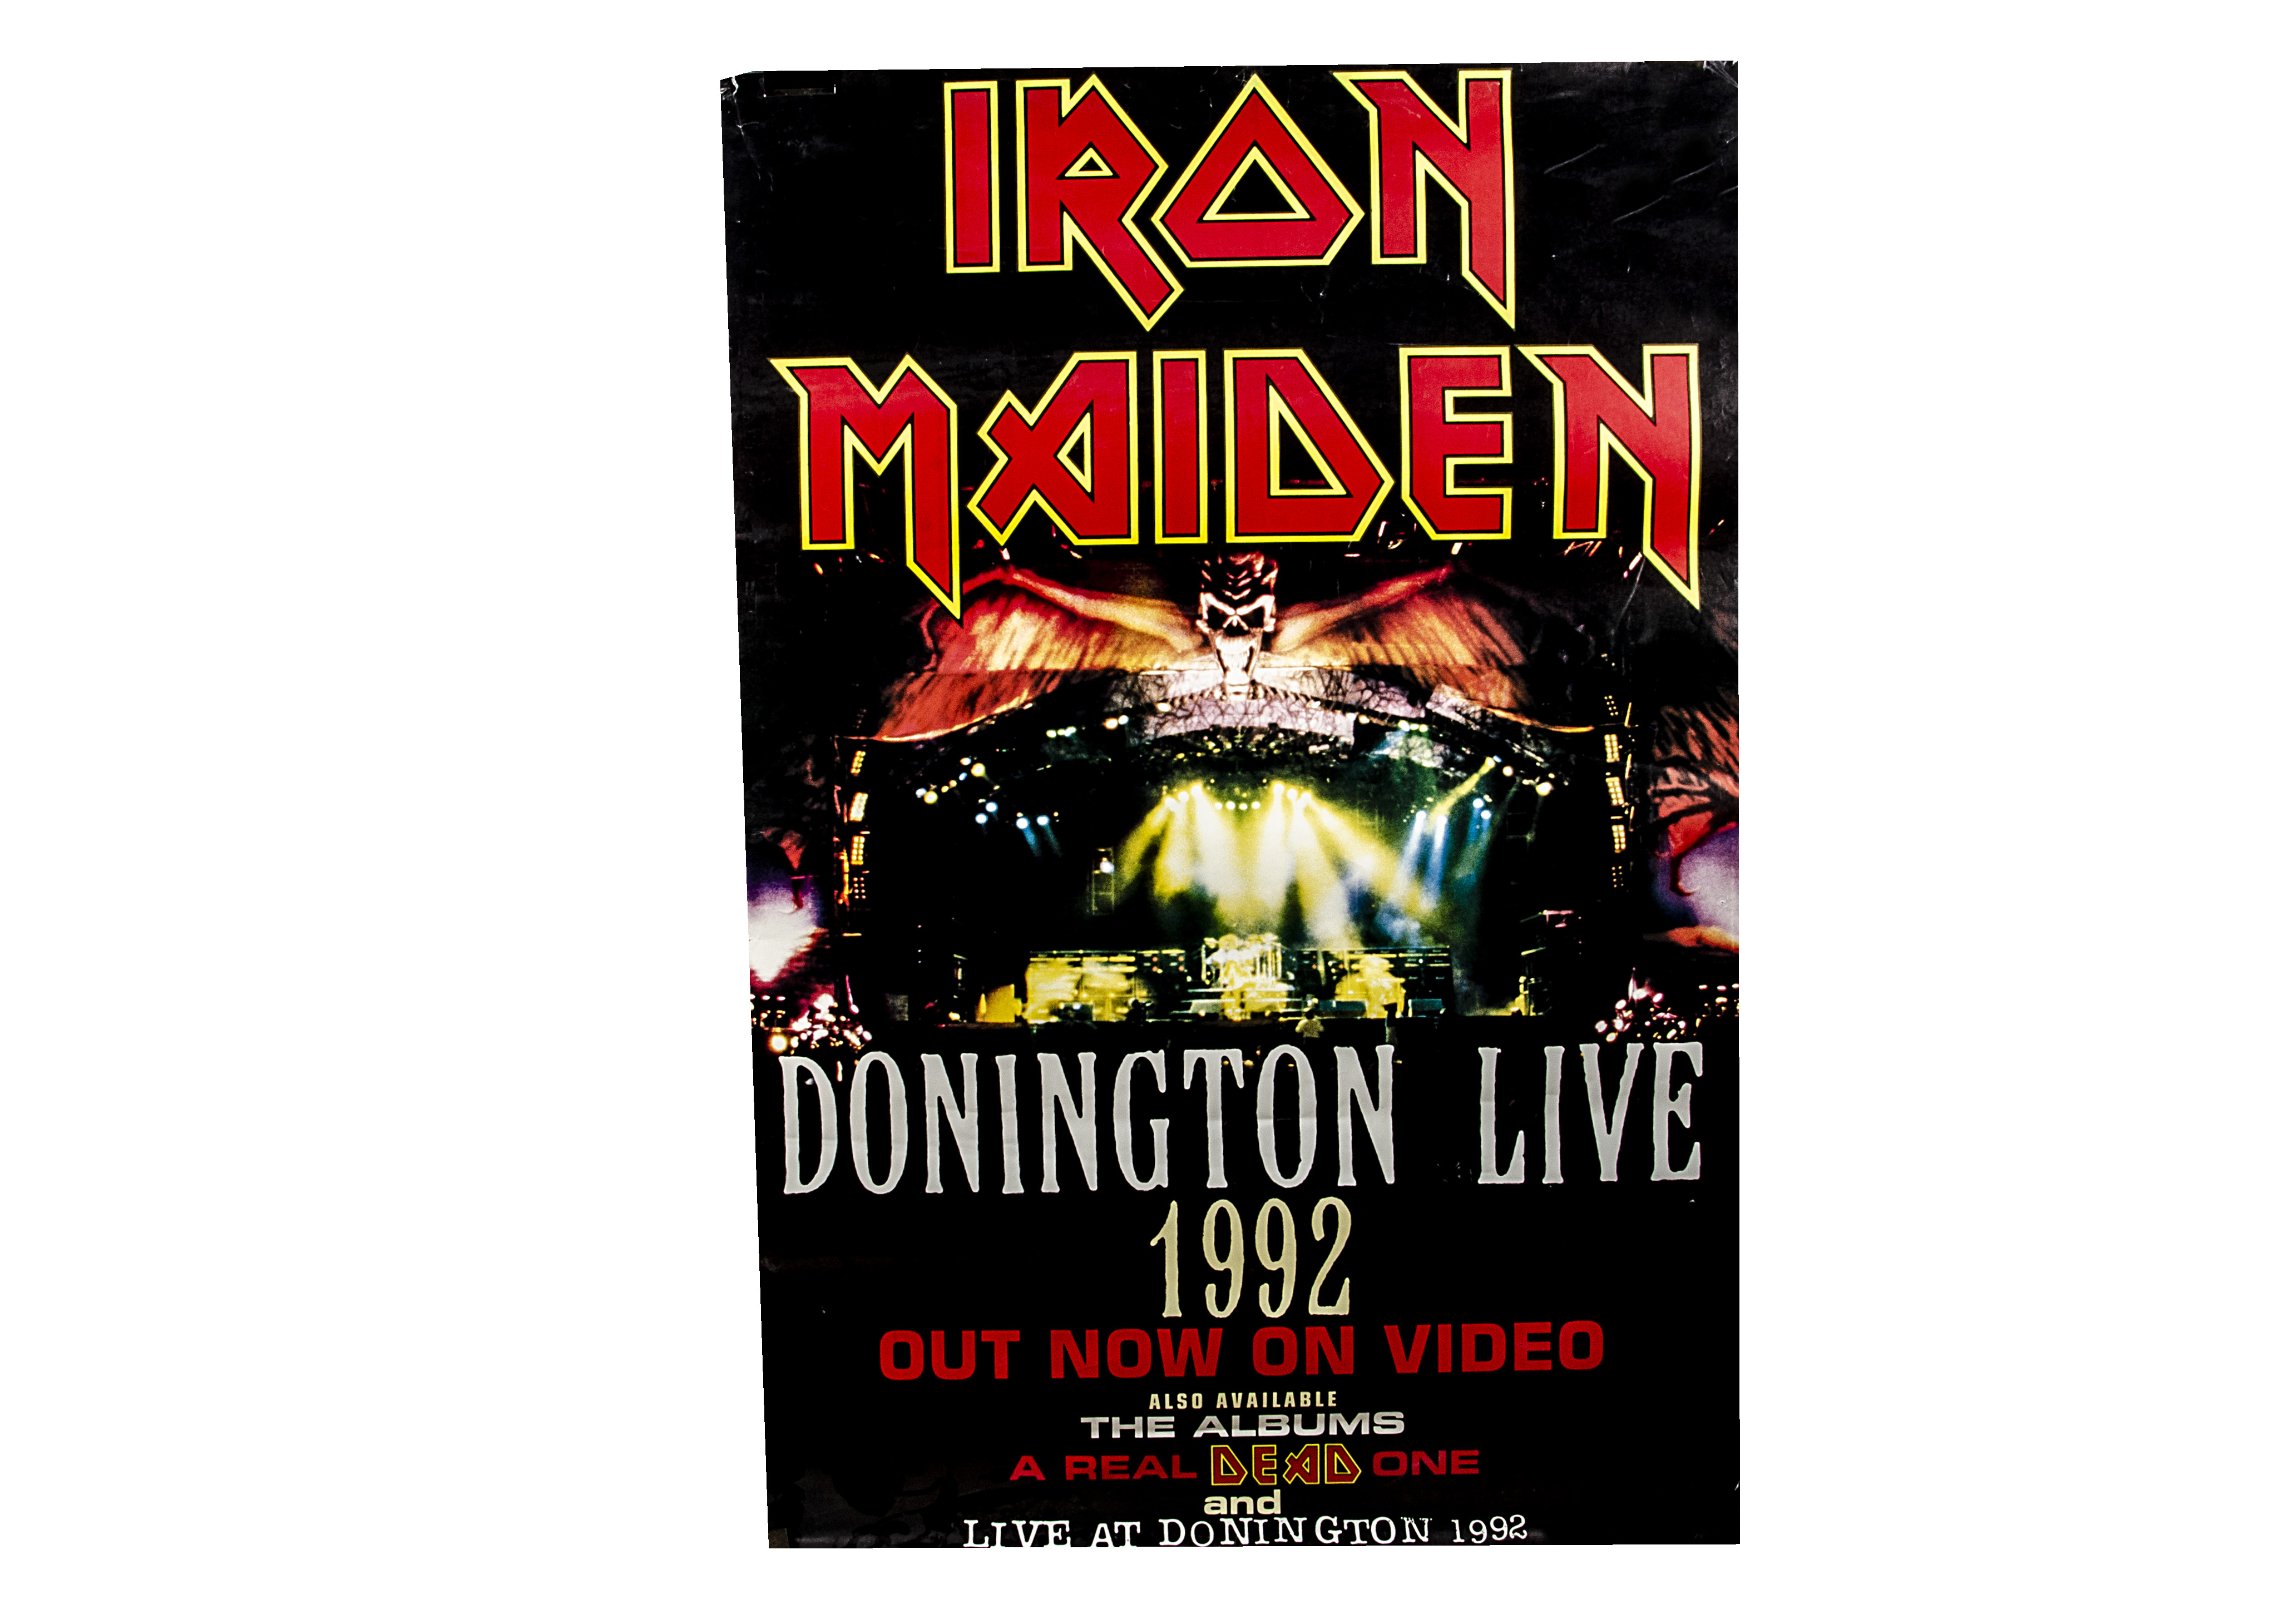 Iron Maiden Donnington 1992 Poster, Giant Poster for the release of the Donnington 1992 Video and